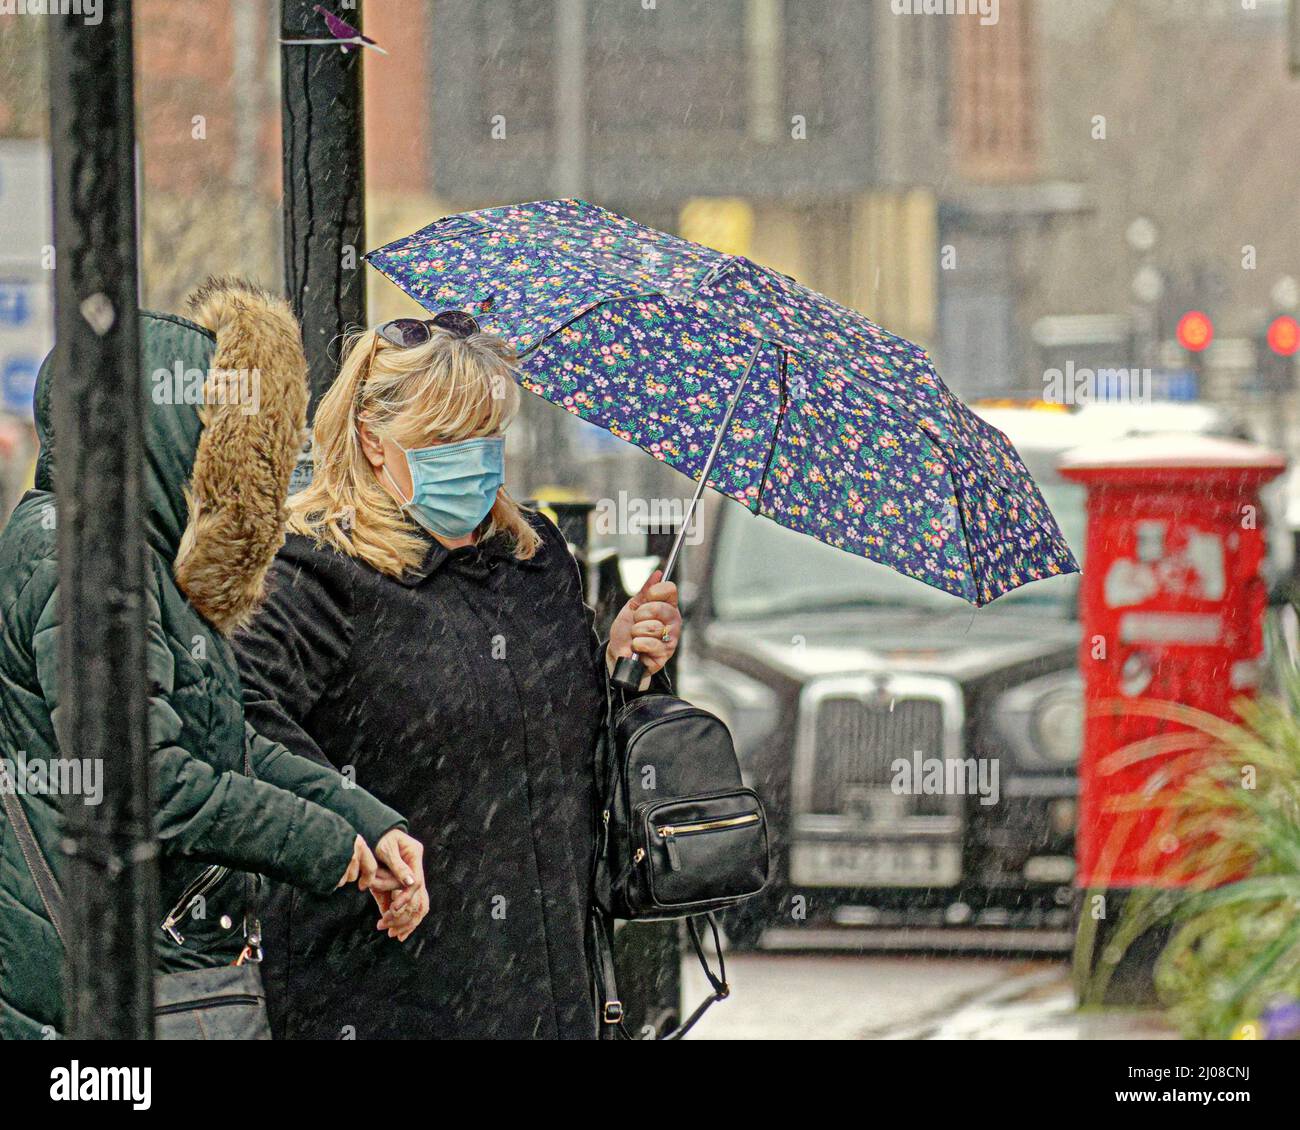 Glasgow, Scotland, UK 17th March, 2022. UK  Weather: : Rainy day saw summer like weather disappear as April showers arrived early to the applause of umbrellas in the city centre. Credit Gerard Ferry/Alamy Live News Stock Photo